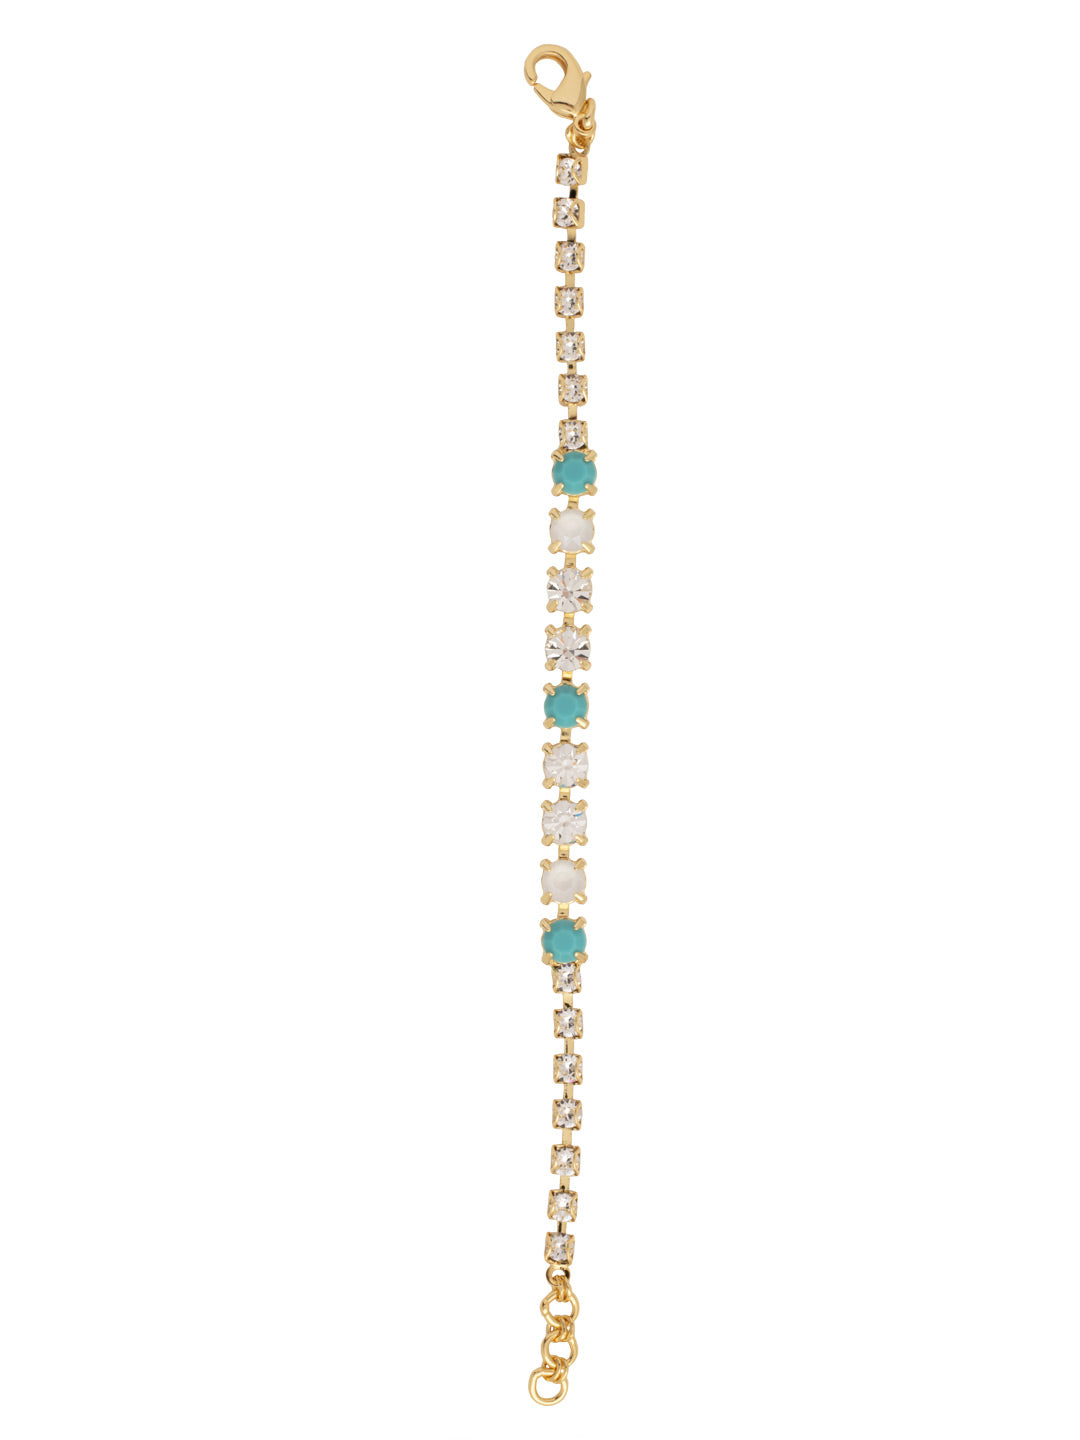 Shaughna Tennis Bracelet - BET38BGSTO - <p>The Shaughna Tennis Bracelet is a versatile piece that is sure to suit sparkle lovers. Its round crystal stones shine in an assortment of shades. It's just the piece to take your outfit up a notch. From Sorrelli's Santorini collection in our Bright Gold-tone finish.</p>